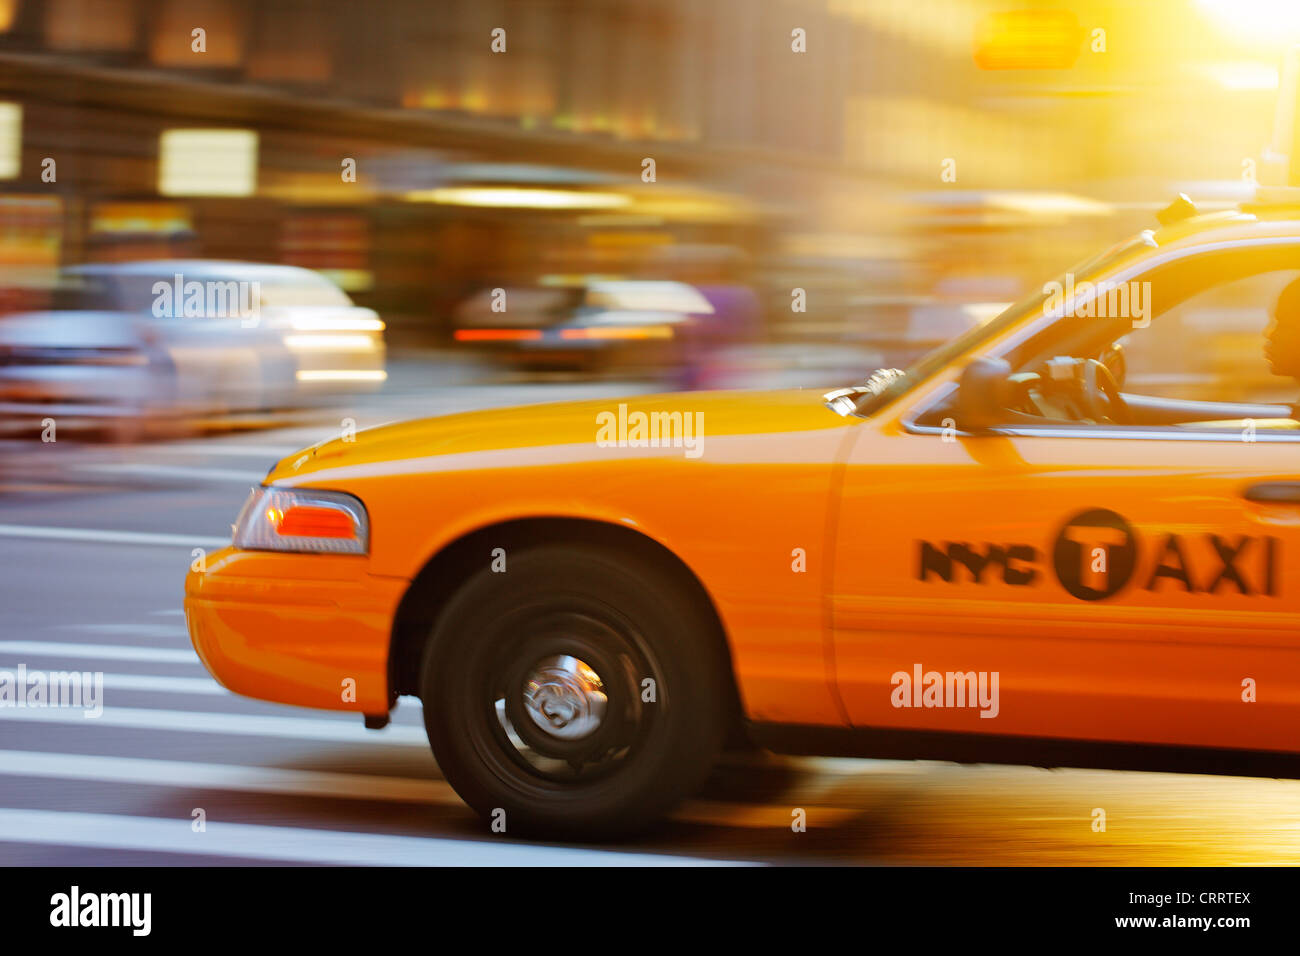 NEW YORK CITY, USA - JUNE 8: Blurry image of a NYC cab speeding in the city. June 8, 2012 in New York City, USA Stock Photo